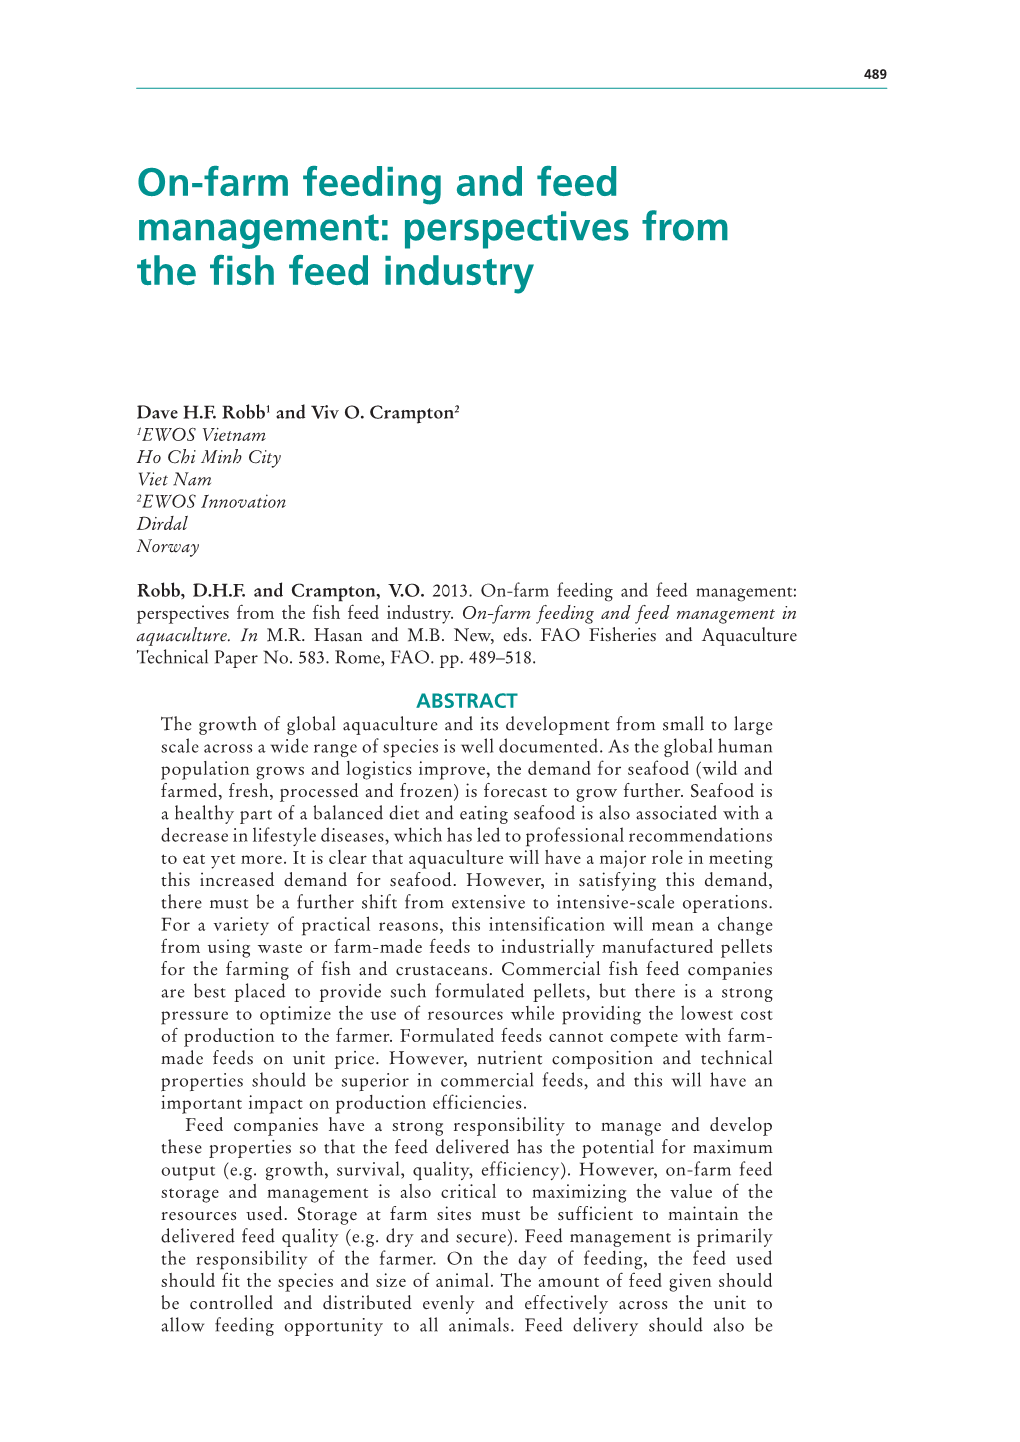 On-Farm Feeding and Feed Management: Perspectives from the Fish Feed Industry